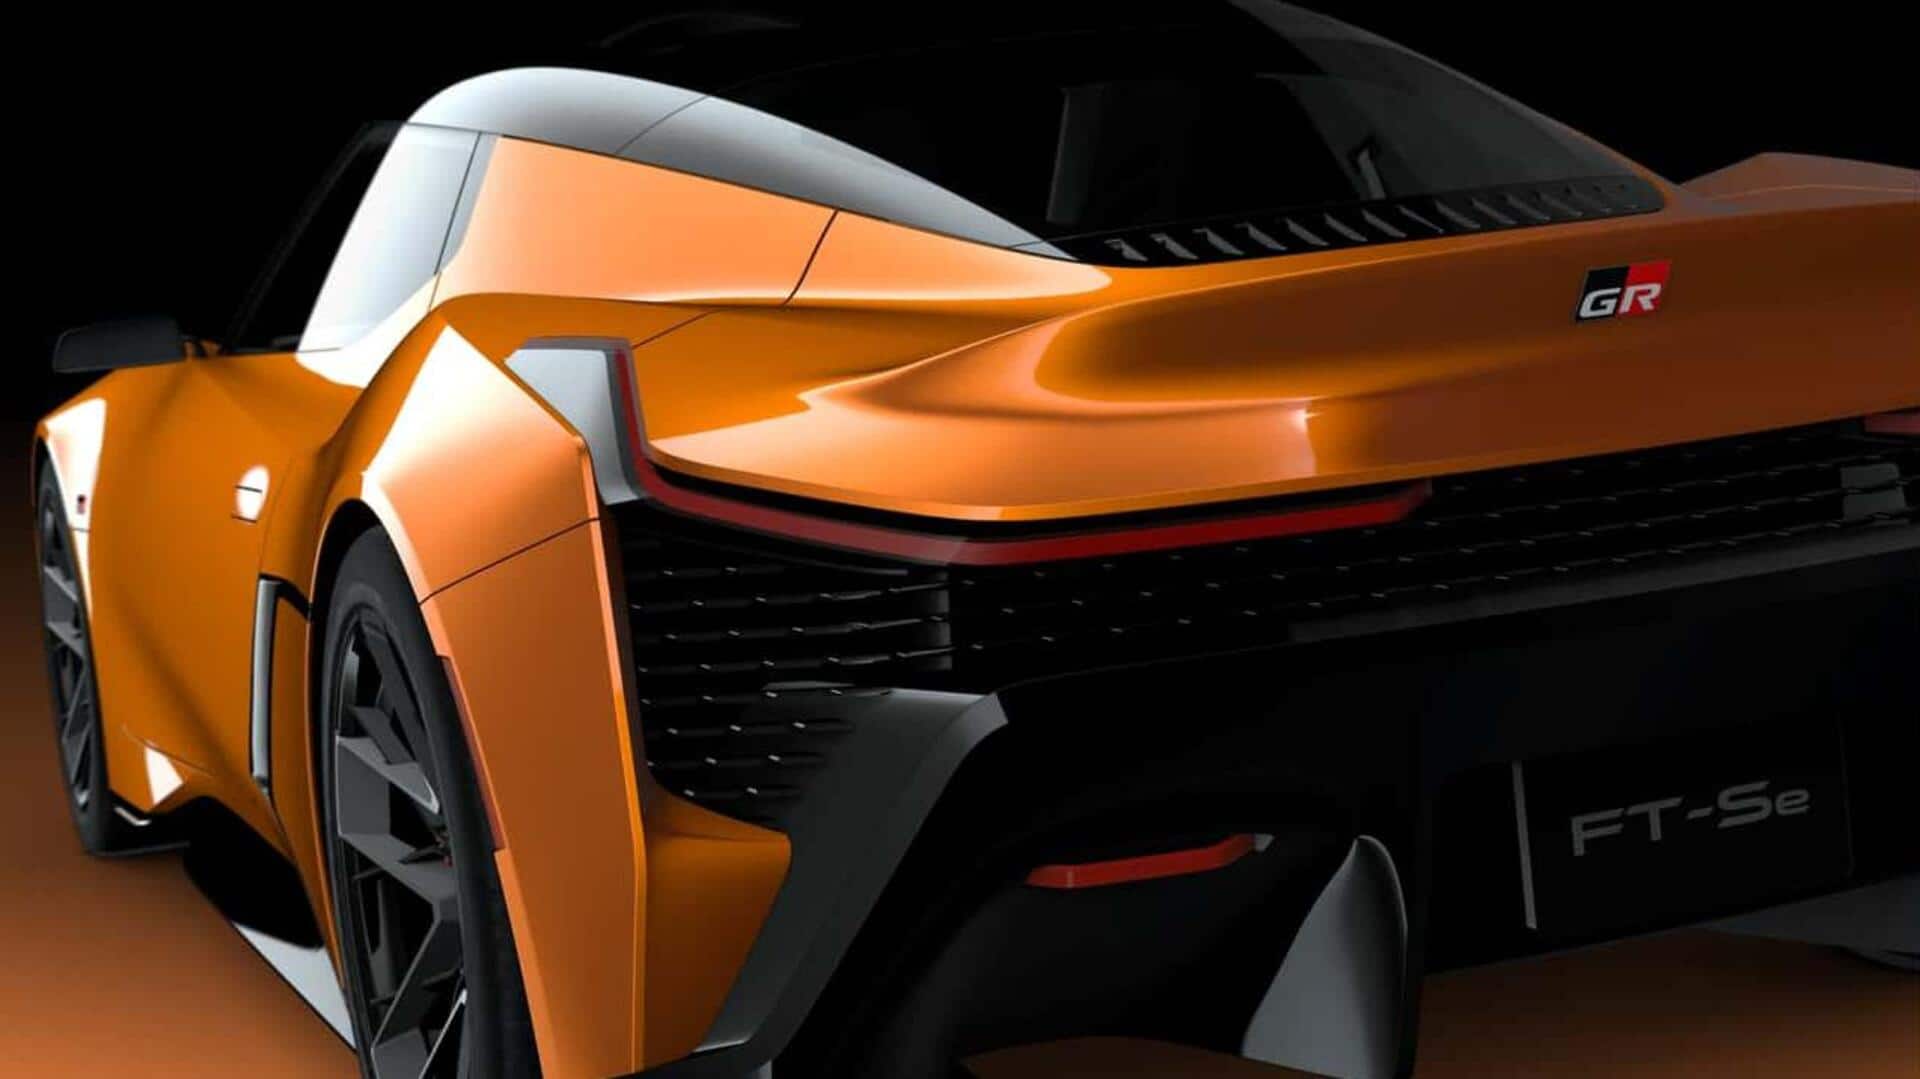 Toyota teases FT-Se electric sports car concept: What to expect